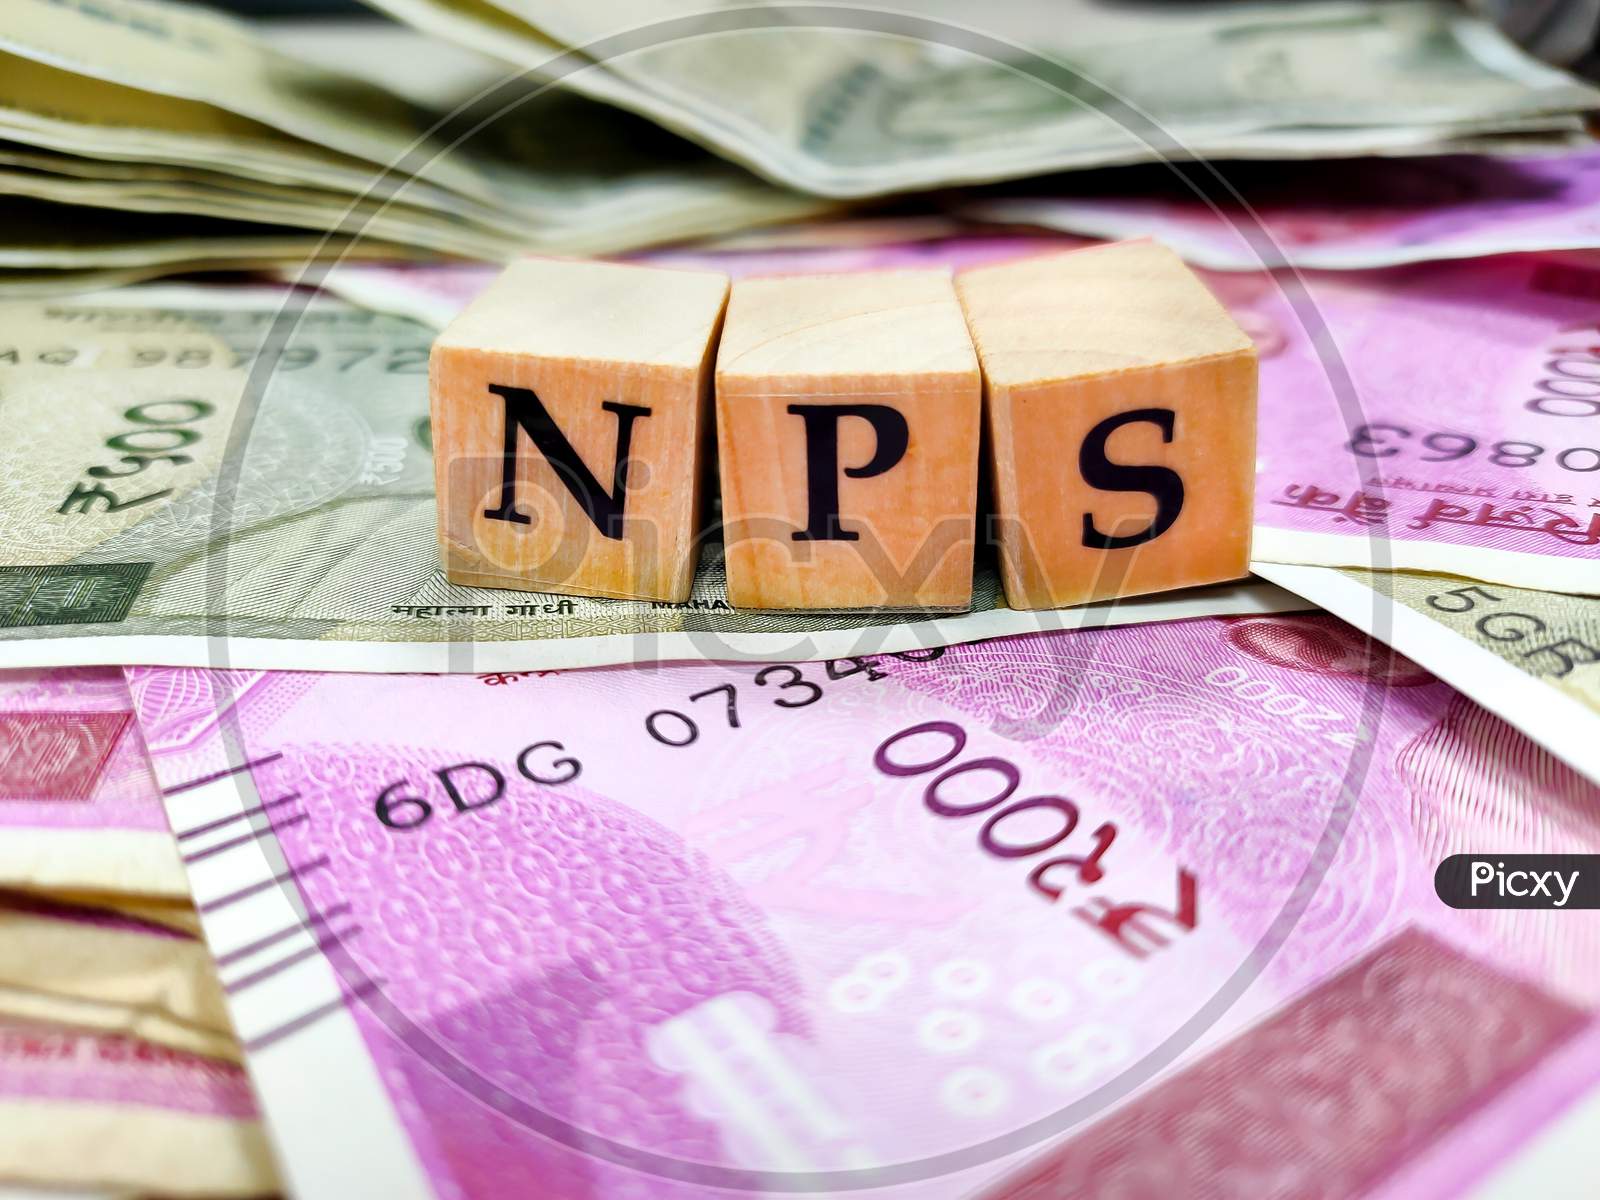 Nps Or National Pension Scheme With Wooden Bids Or Blocks On Indian Rupees Notes.